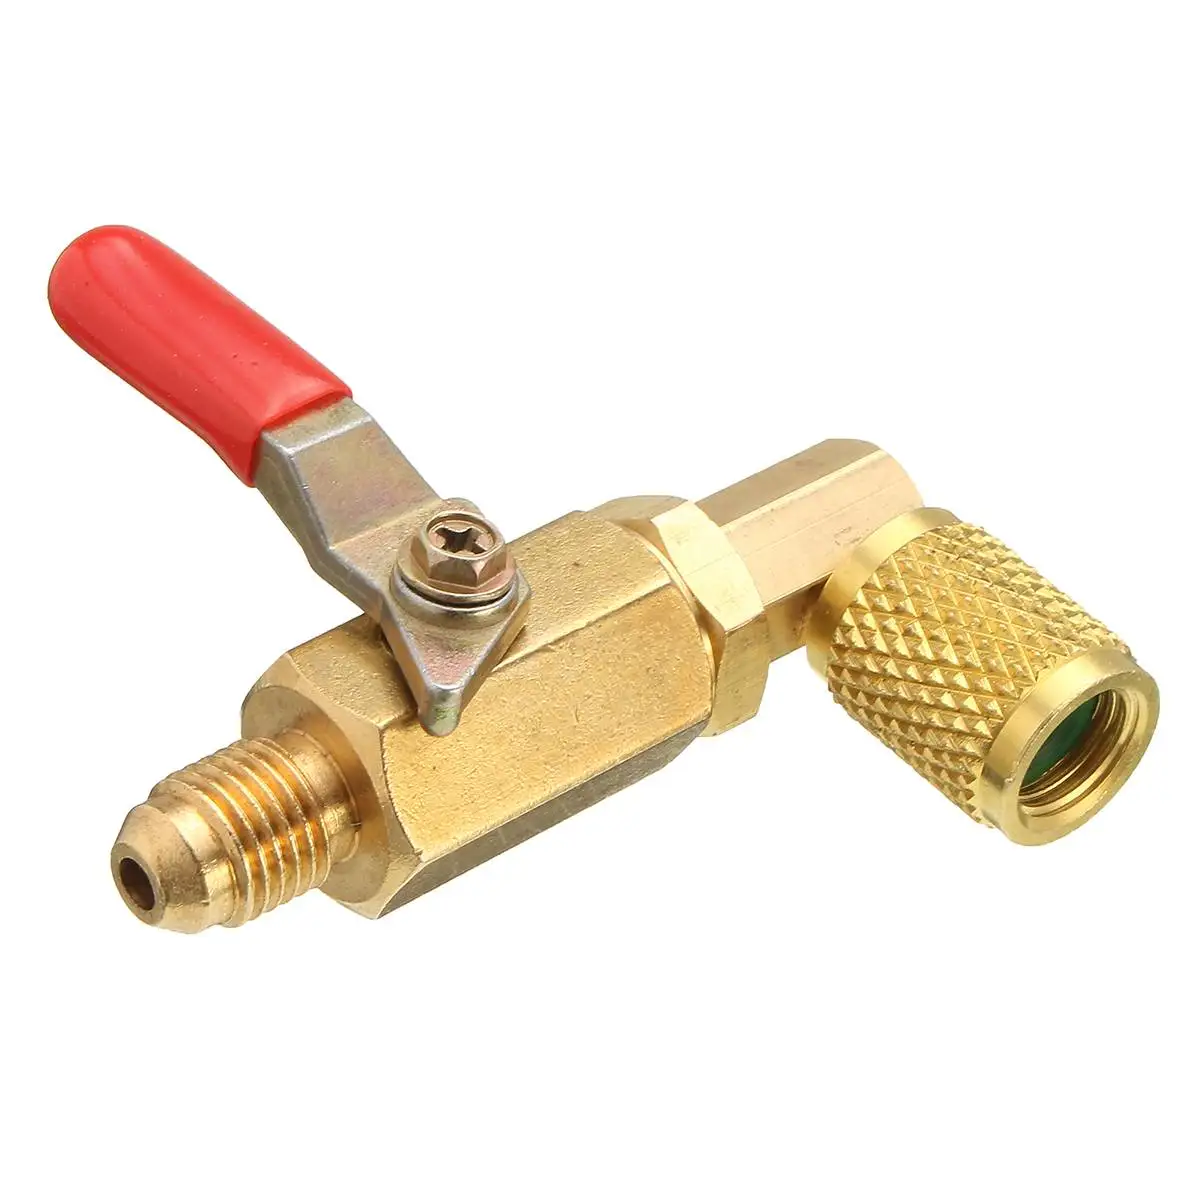 A/C 90 Degree Ball Valves Metal Handle Auto Air-conditioning Valve Parts 3 Color Ball Valve for AC Refrigerant R410A R134A - Название цвета: Red